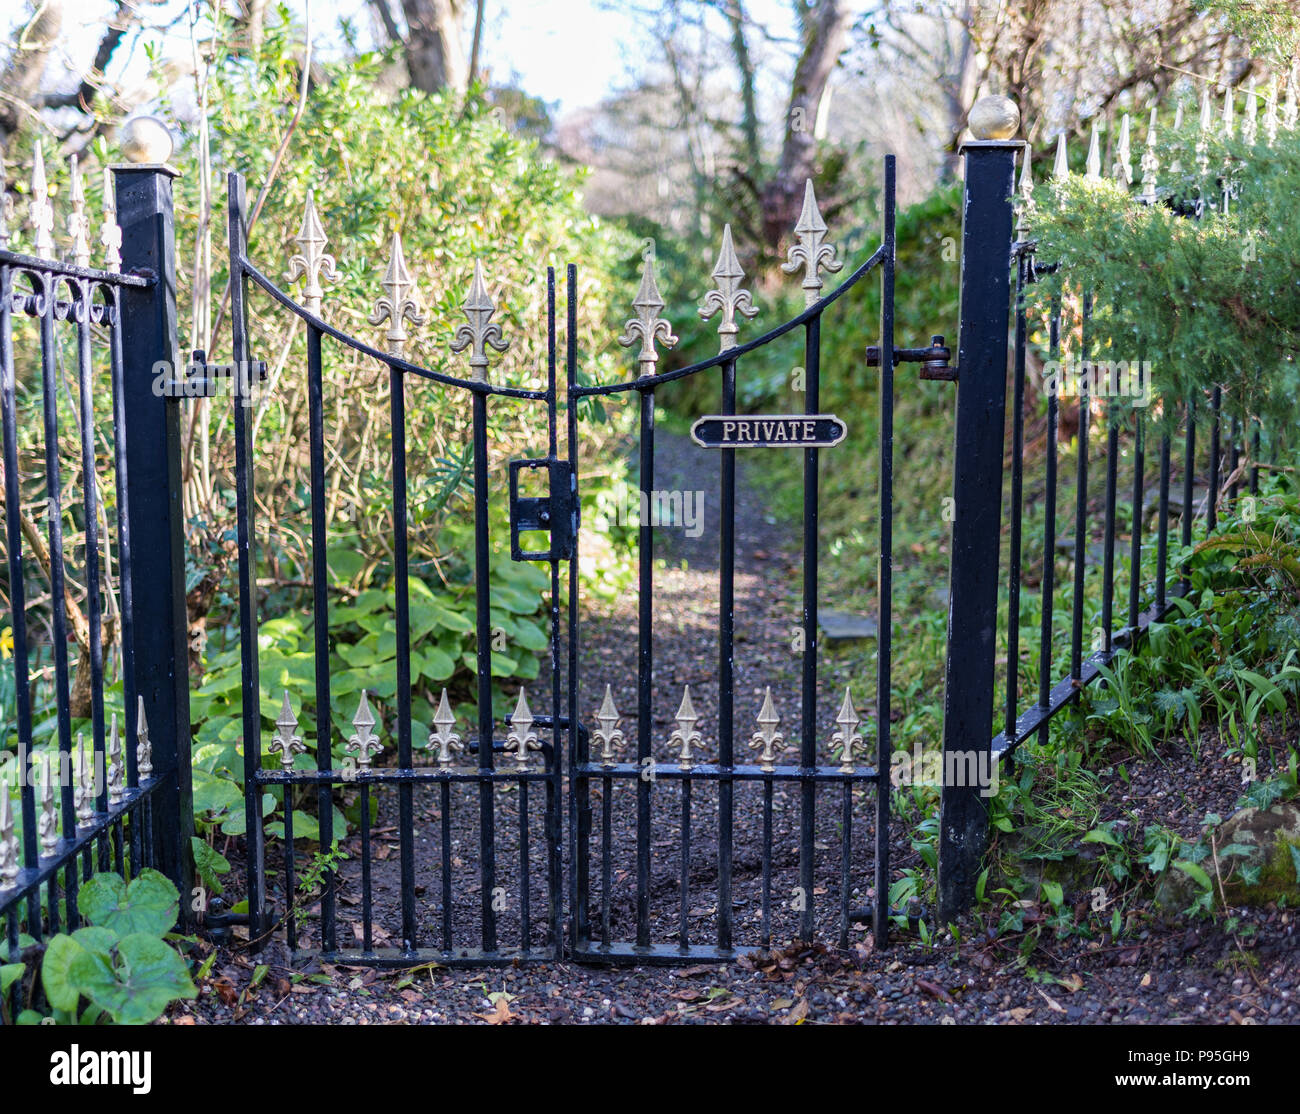 Black iron gate with private sign Stock Photo